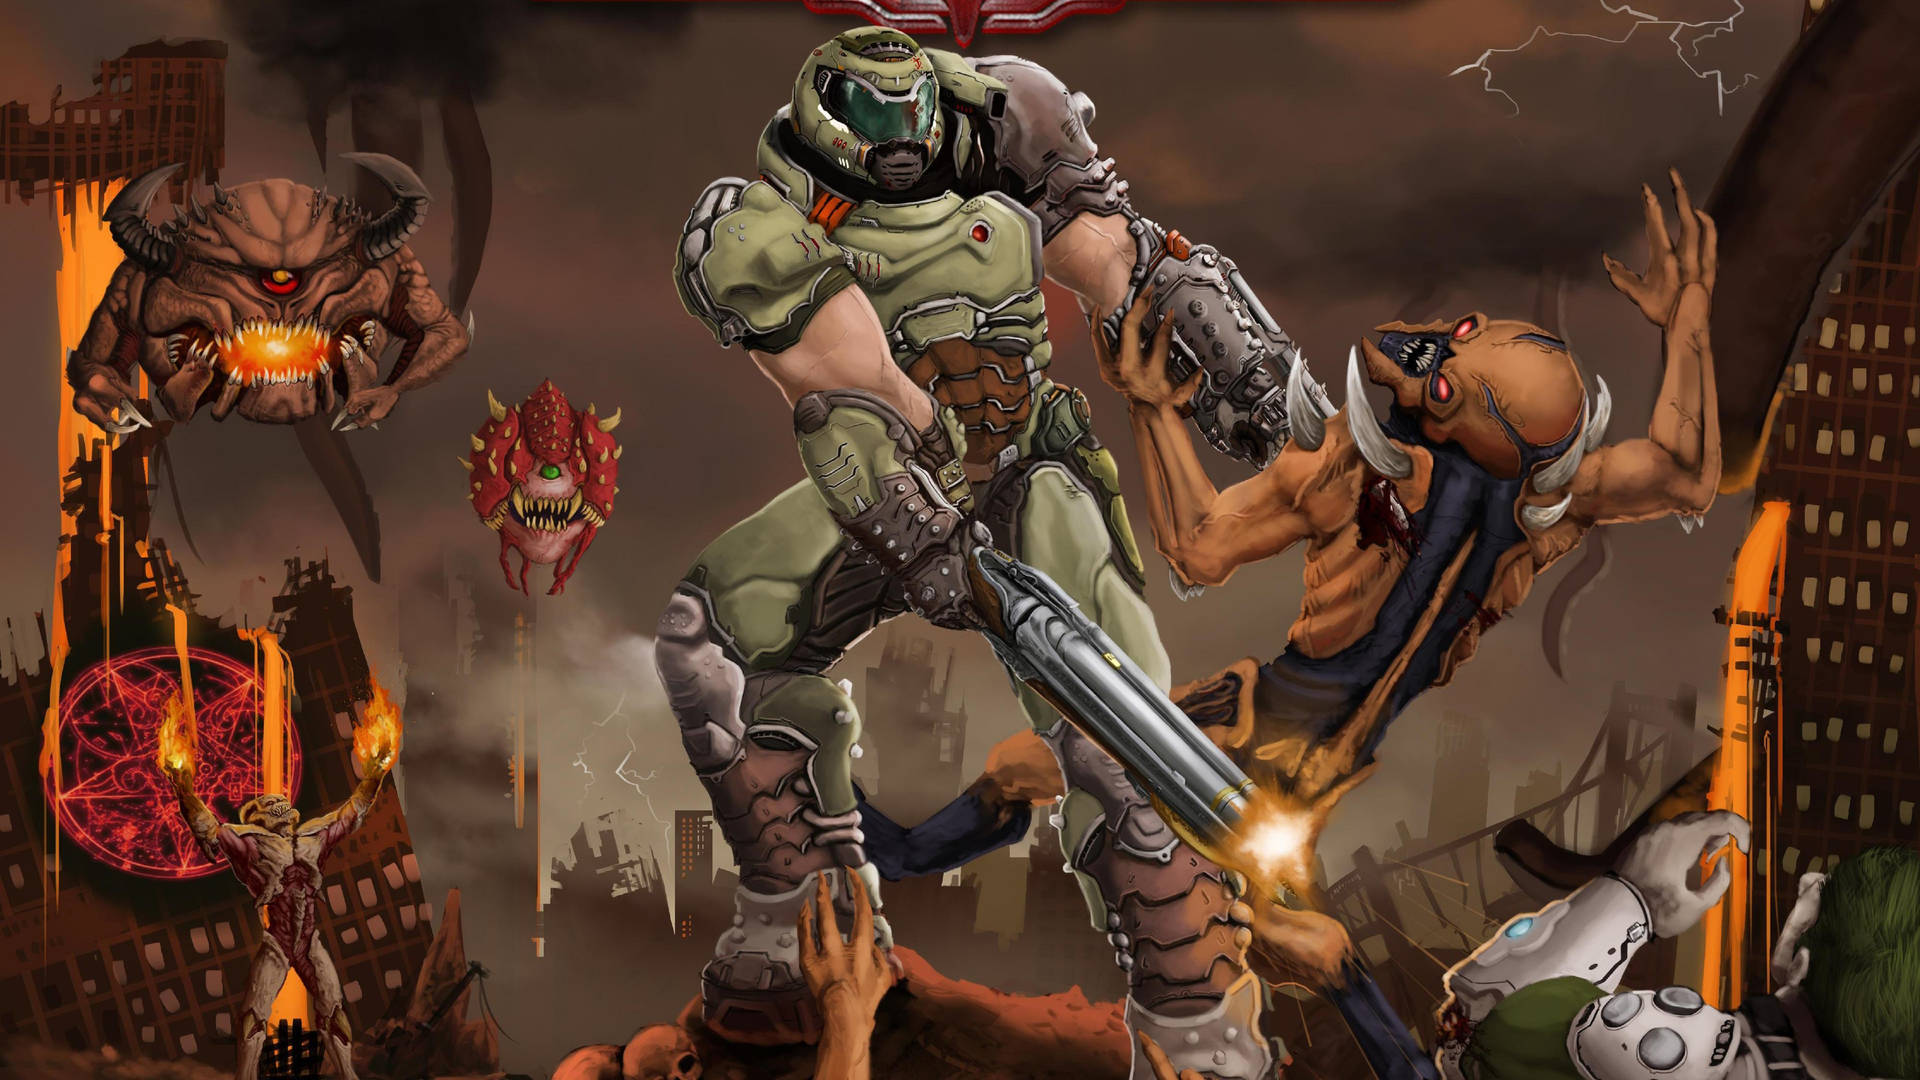 Download Doomguy wallpapers for mobile phone free Doomguy HD pictures